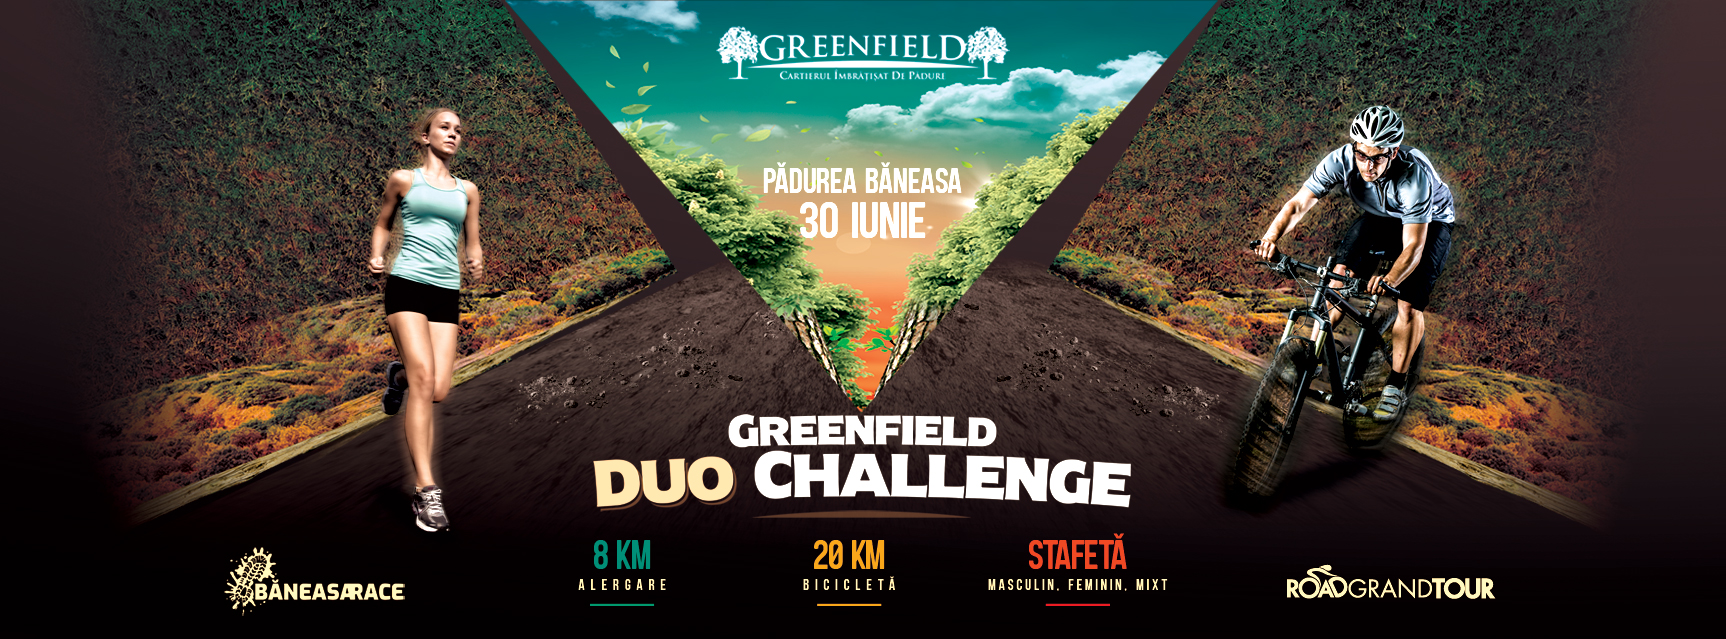 Greenfield DUO Challenge